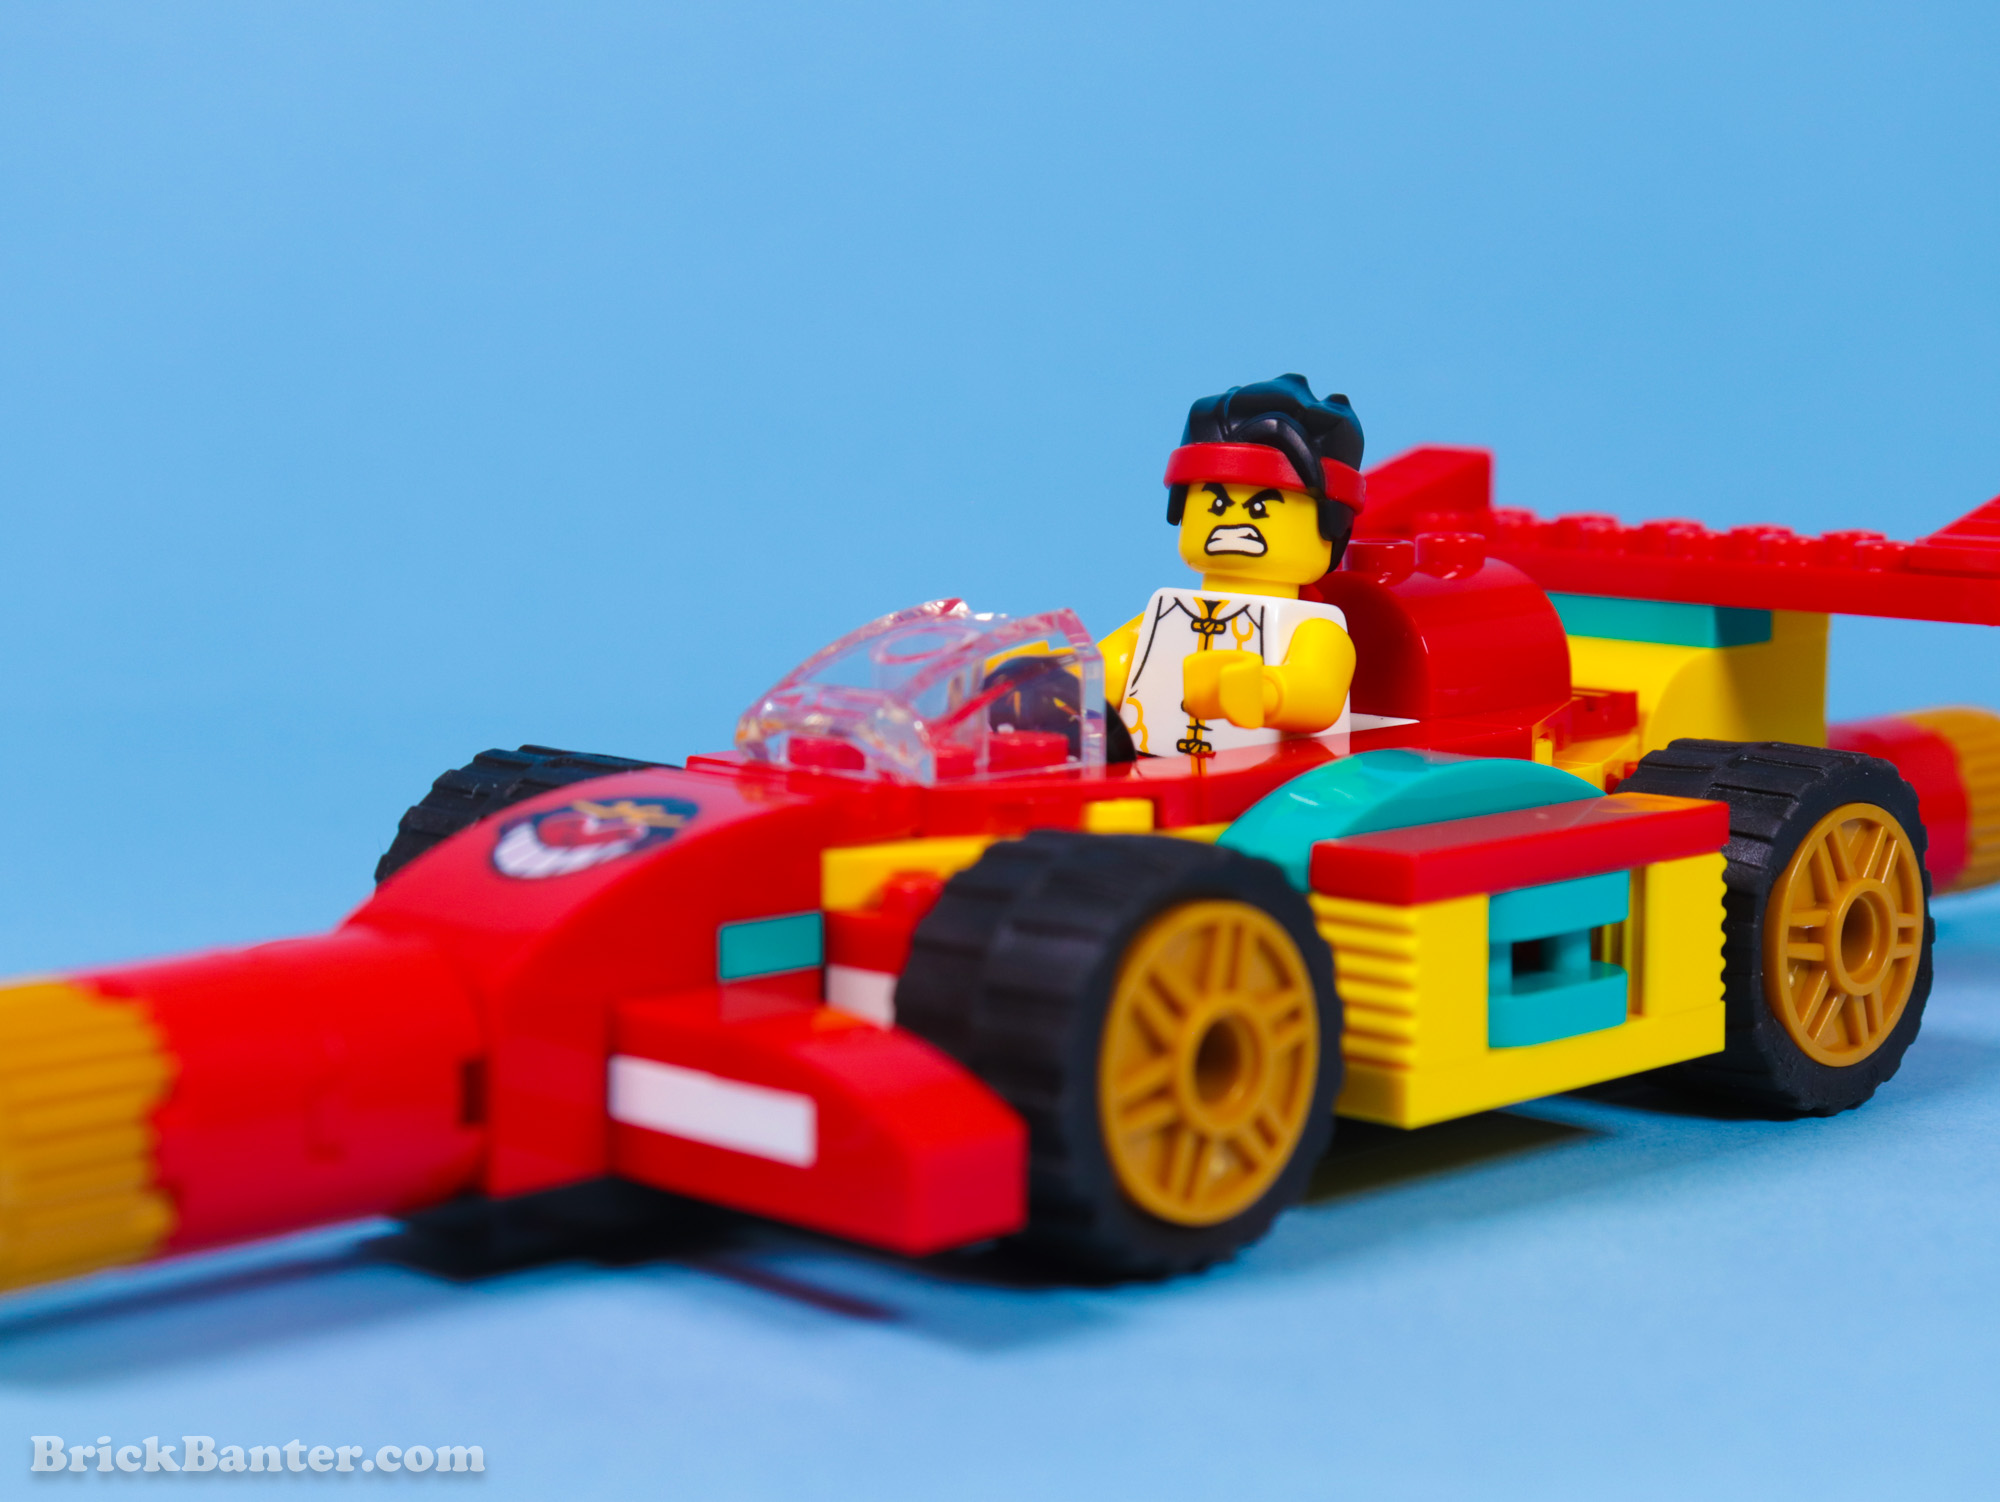 LEGO 80030 Monkie Kid – Monkie Kid’s Staff Creations Set Review